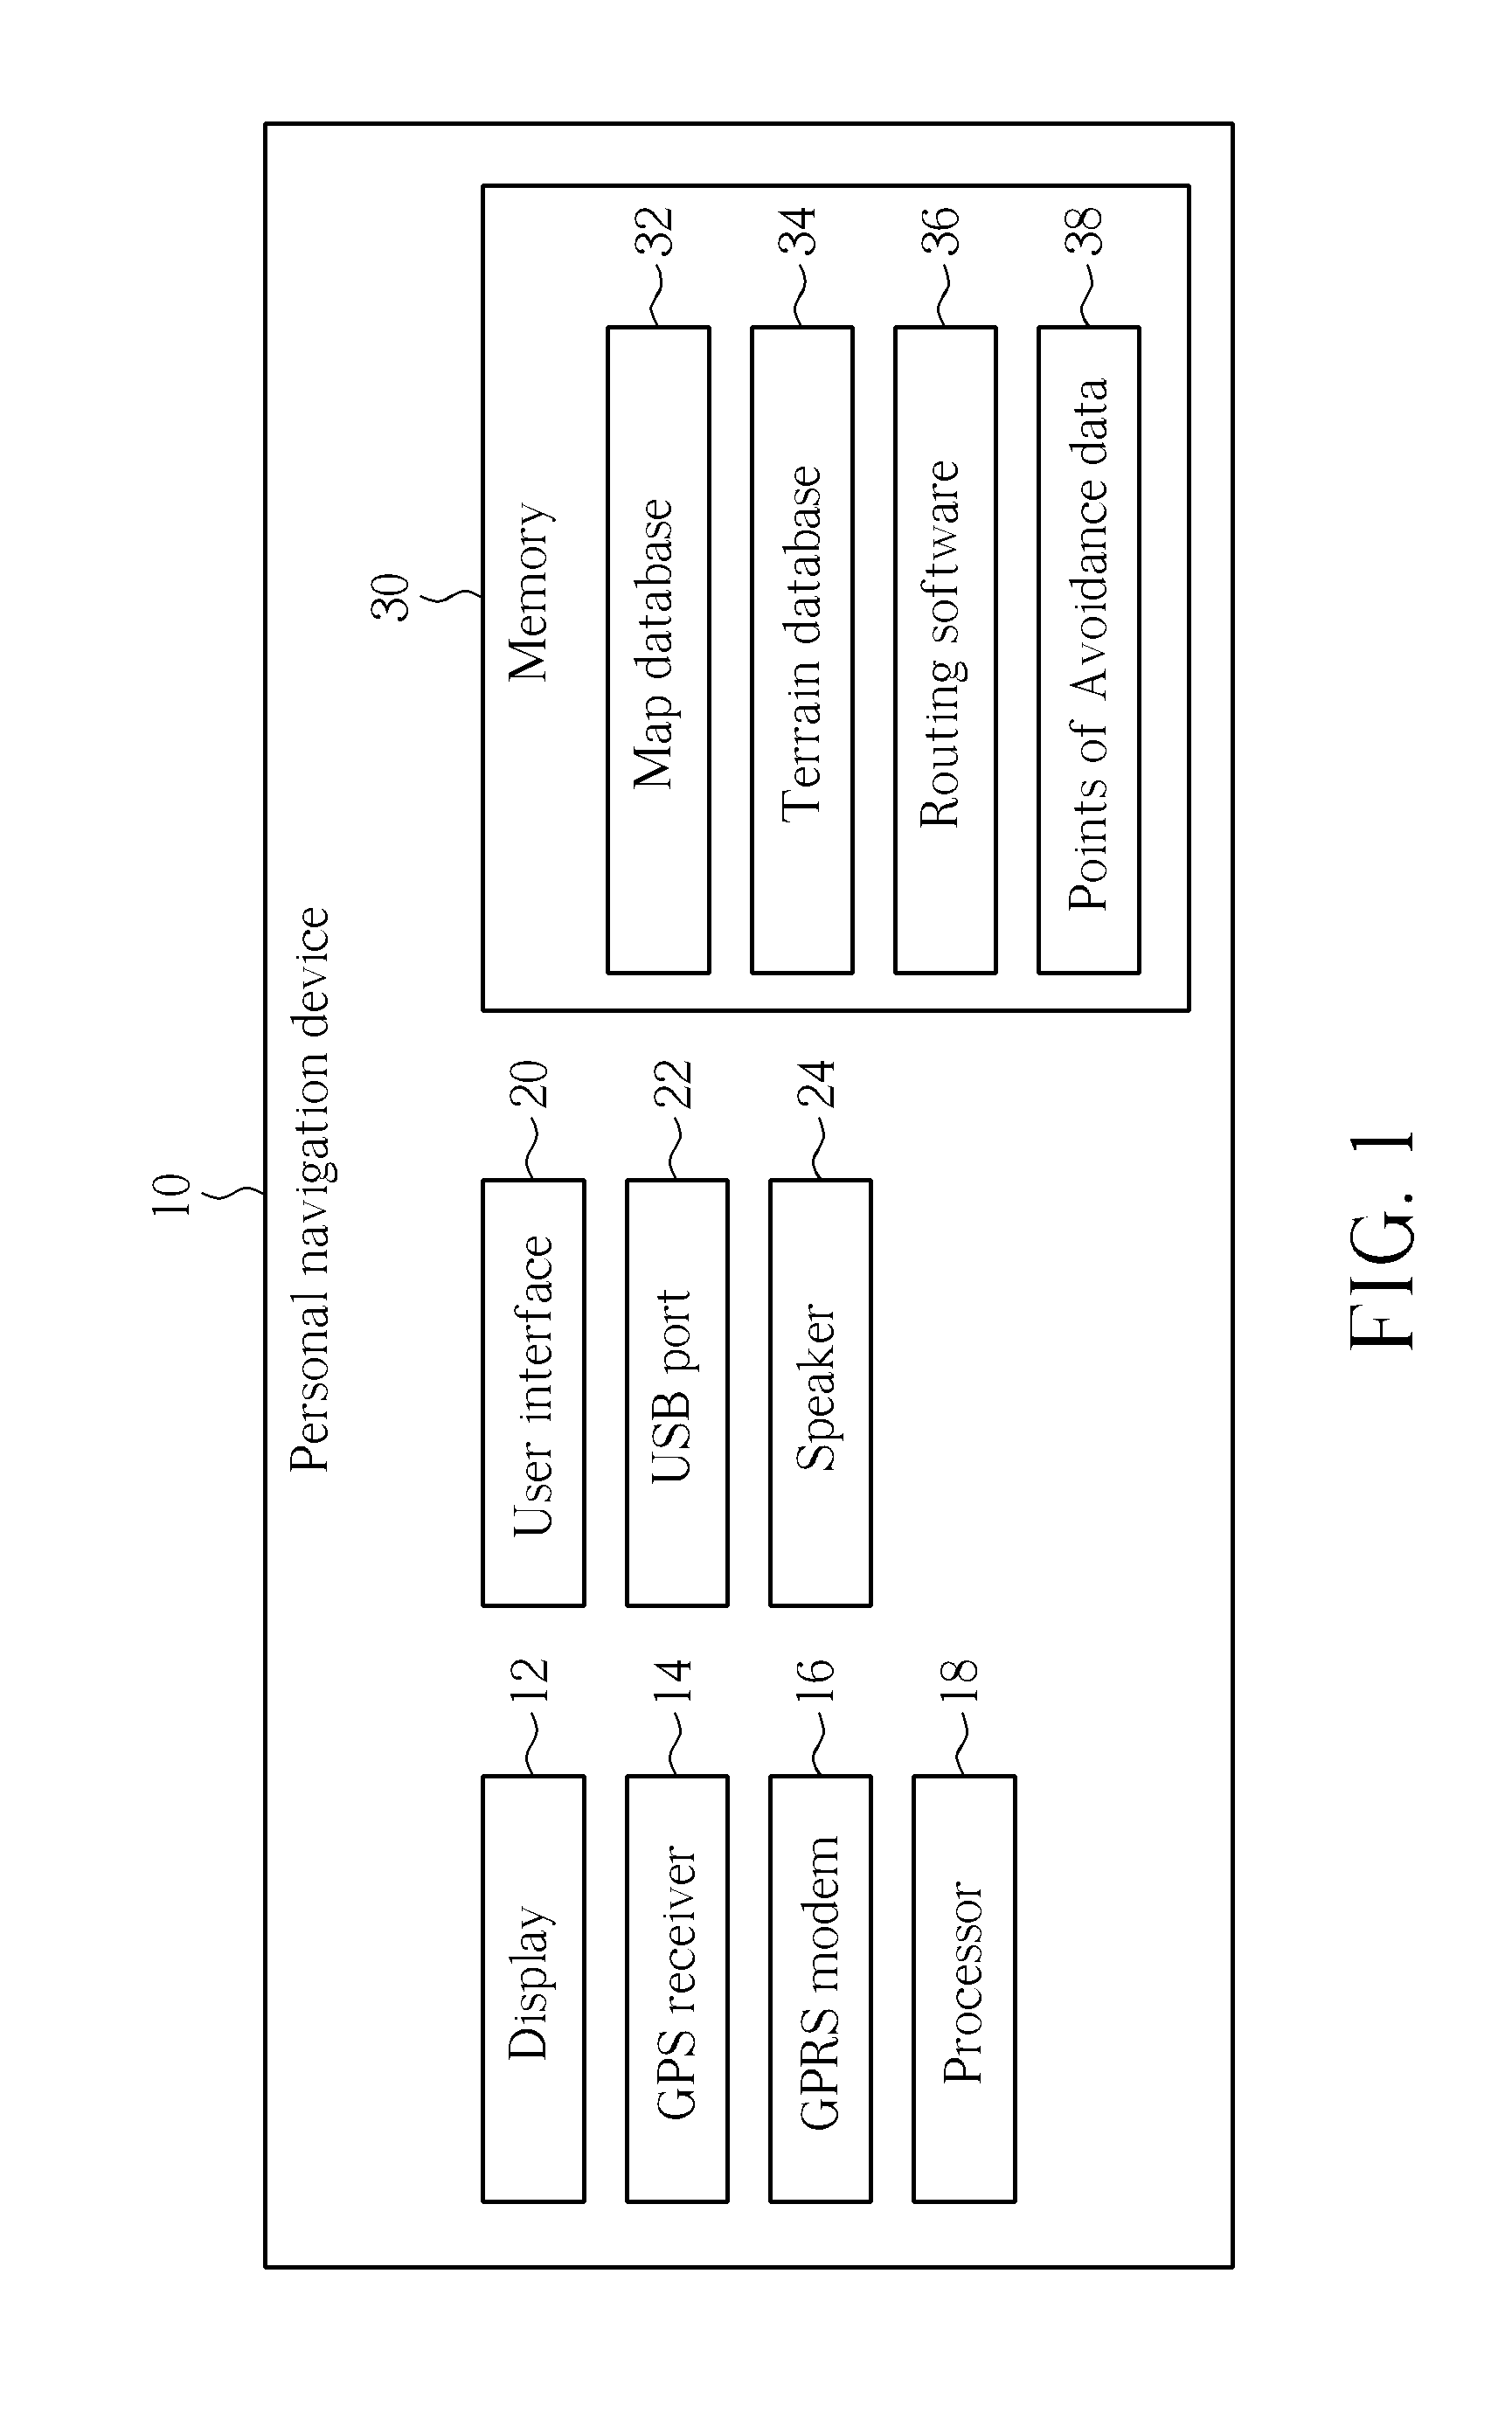 Customizable exercise routes for a user of a personal navigation device